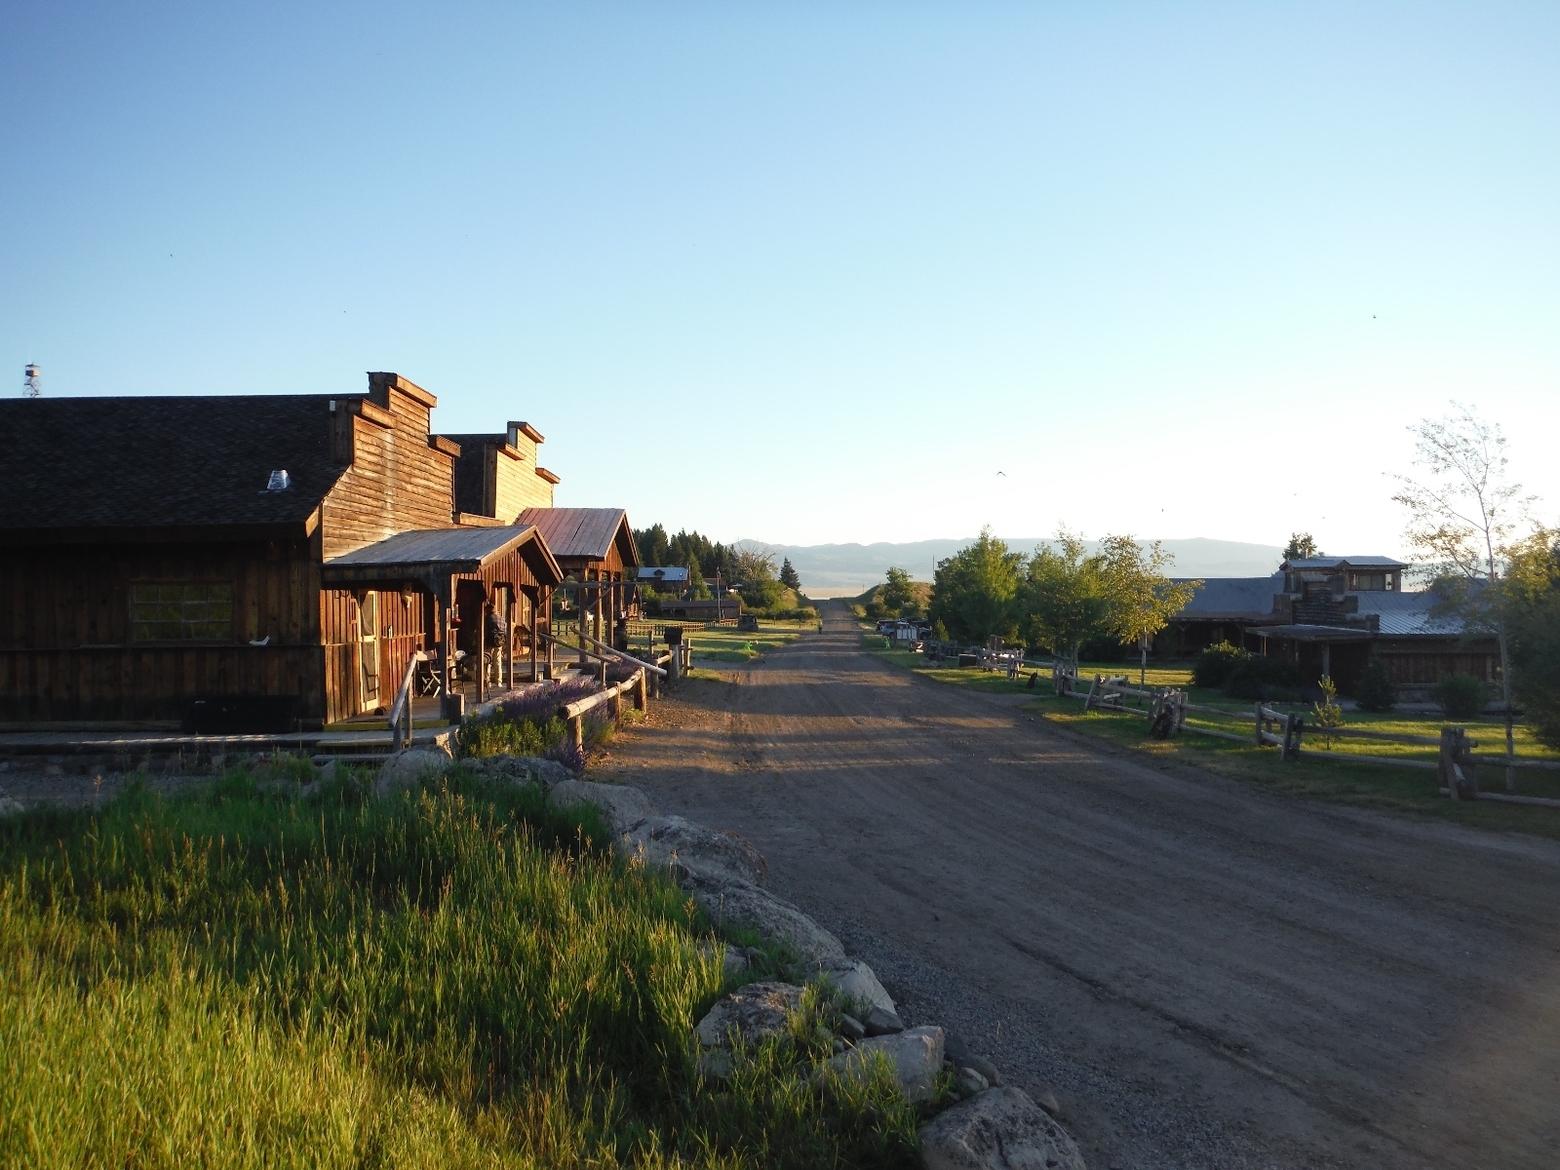 The Taft-Nicholson Center, located in Lakeview, a tiny outpost on the edge of Montana's Centennial Valley. Photo by Sean Cummings